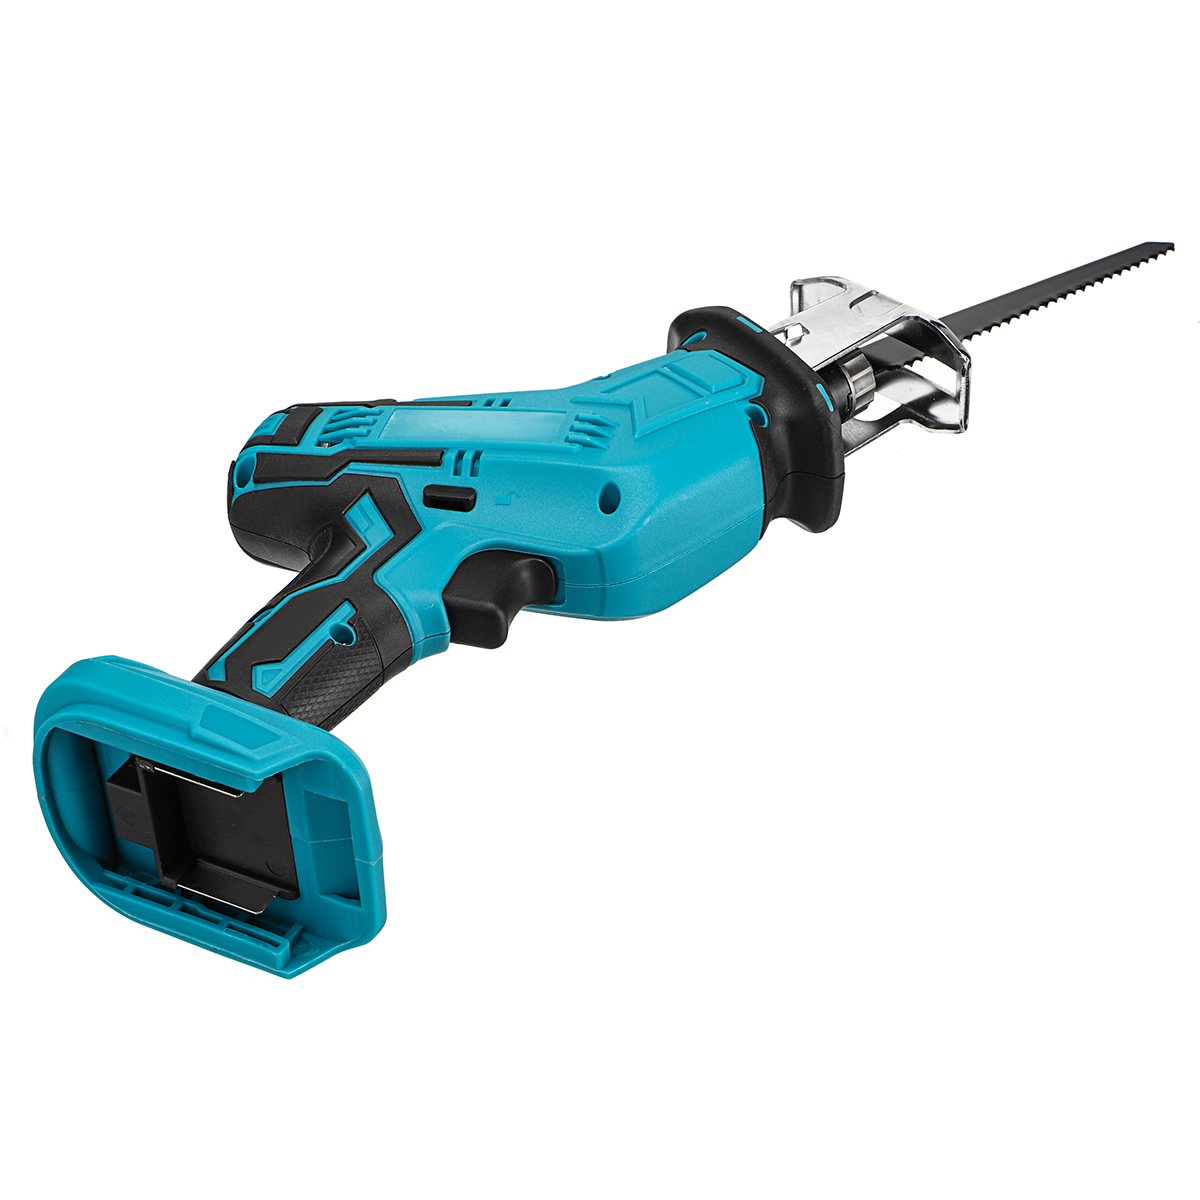 21V-Cordless-Reciprocating-Saw-Electric-Sabre-Saw-Woodworking-Wood-Metal-Cutting-Tool-1762480-7